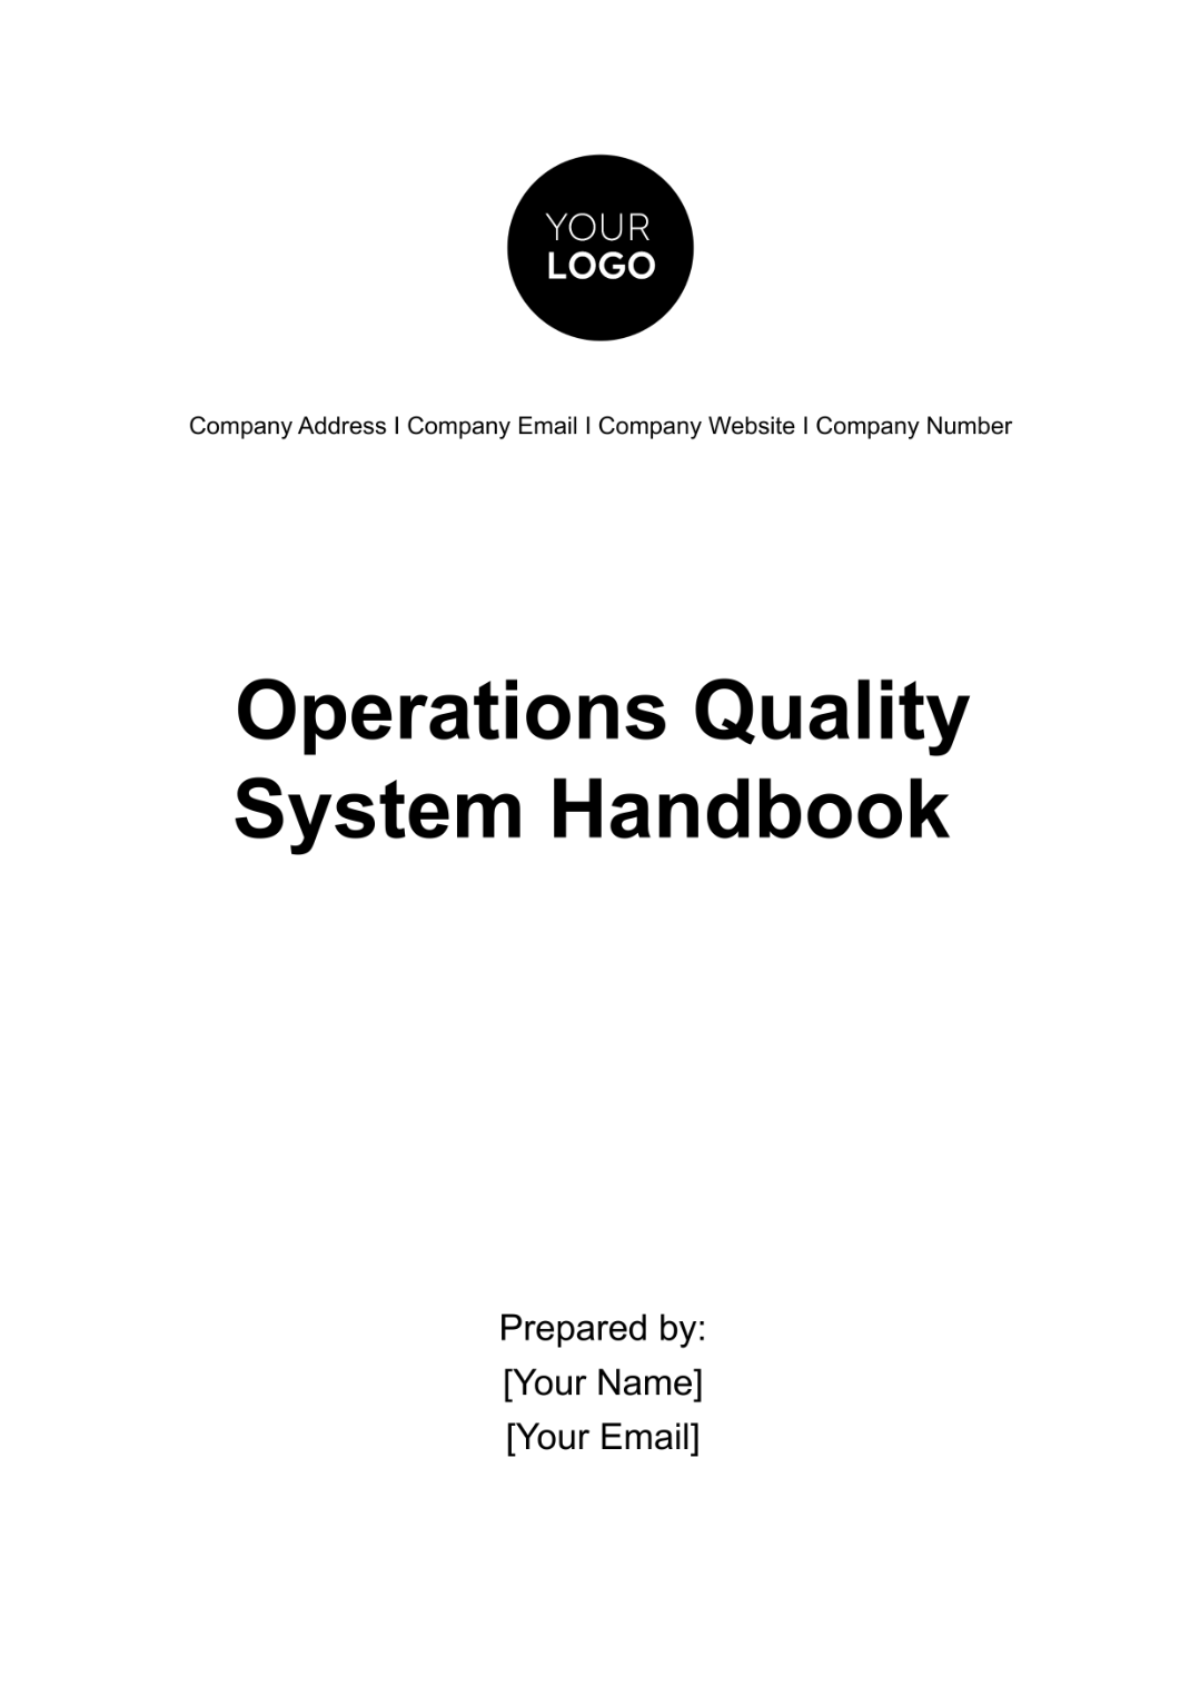 Operations Quality System Handbook Template